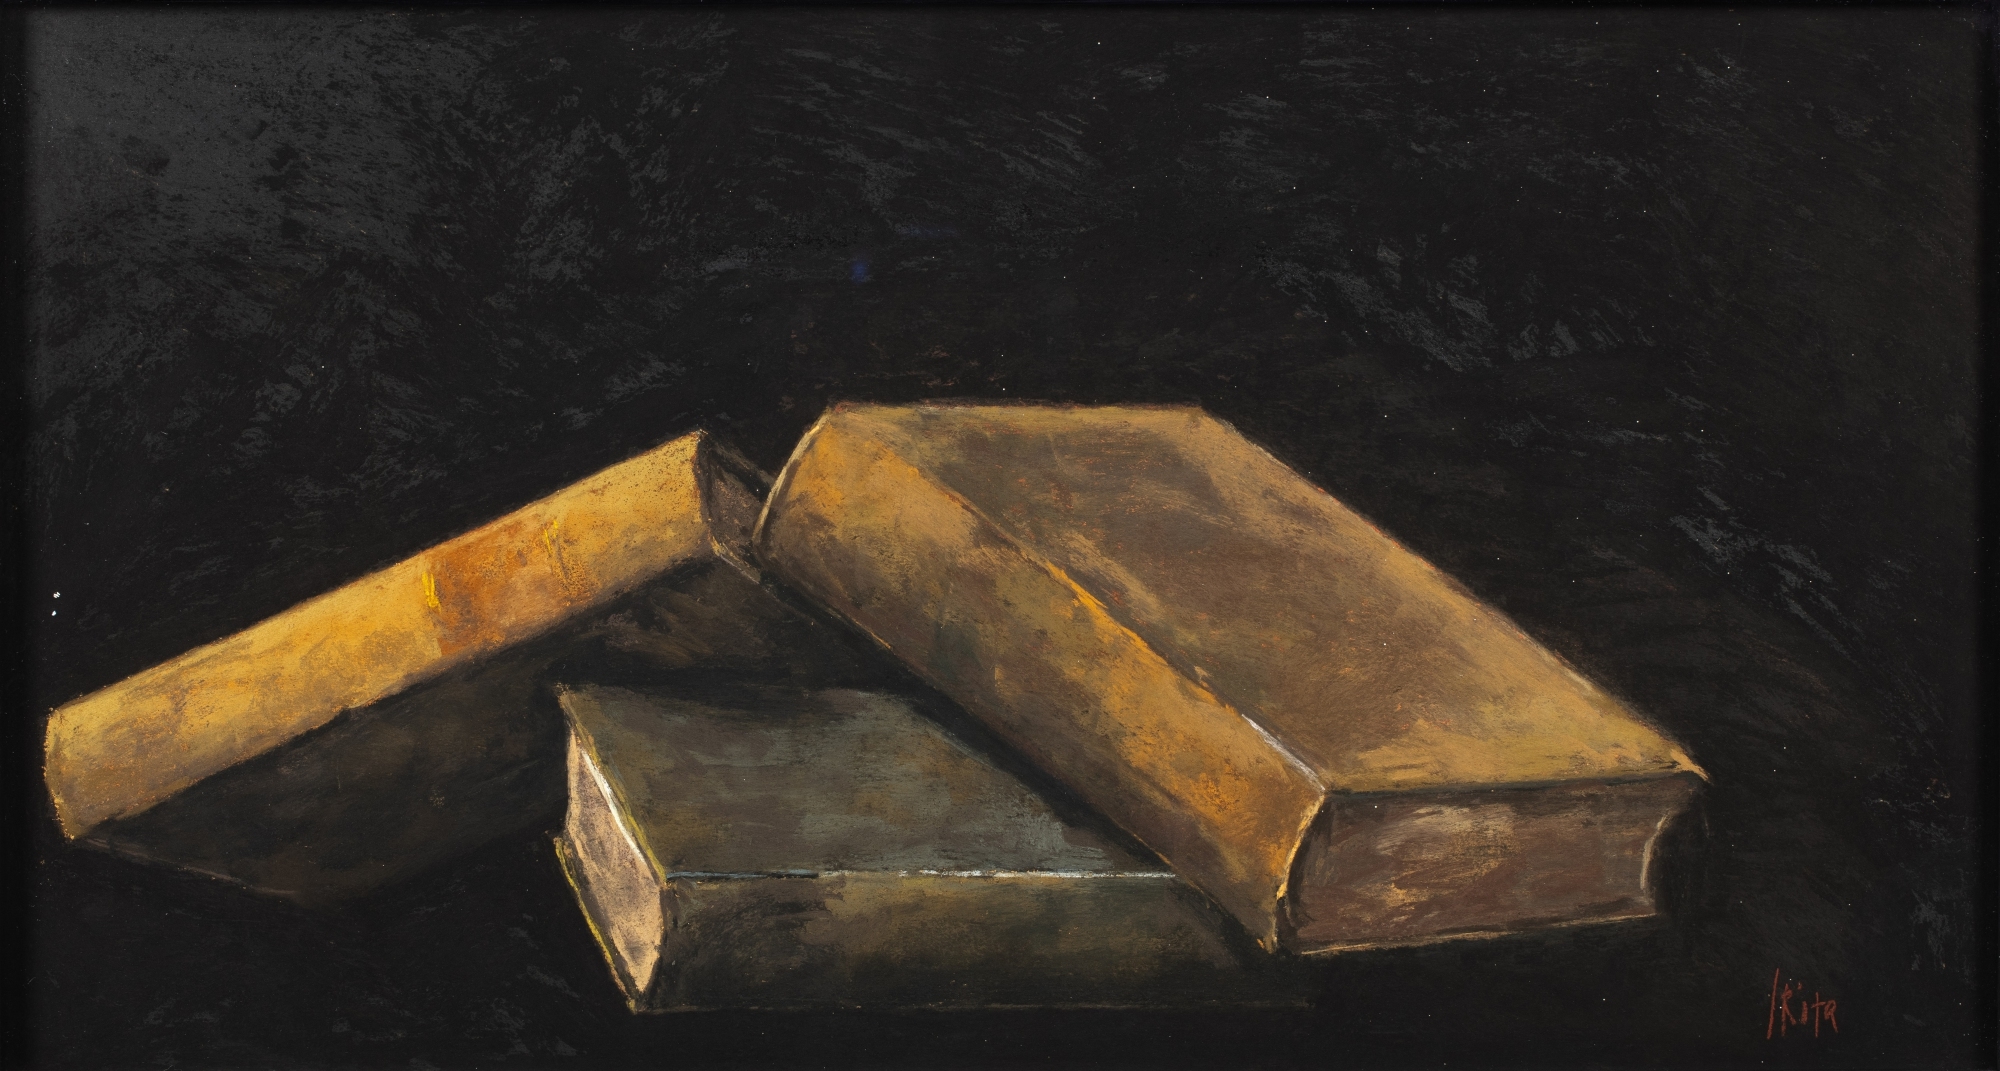 Artwork by Pierre Skira, Nature morte aux livres, Made of pastel on cardboard